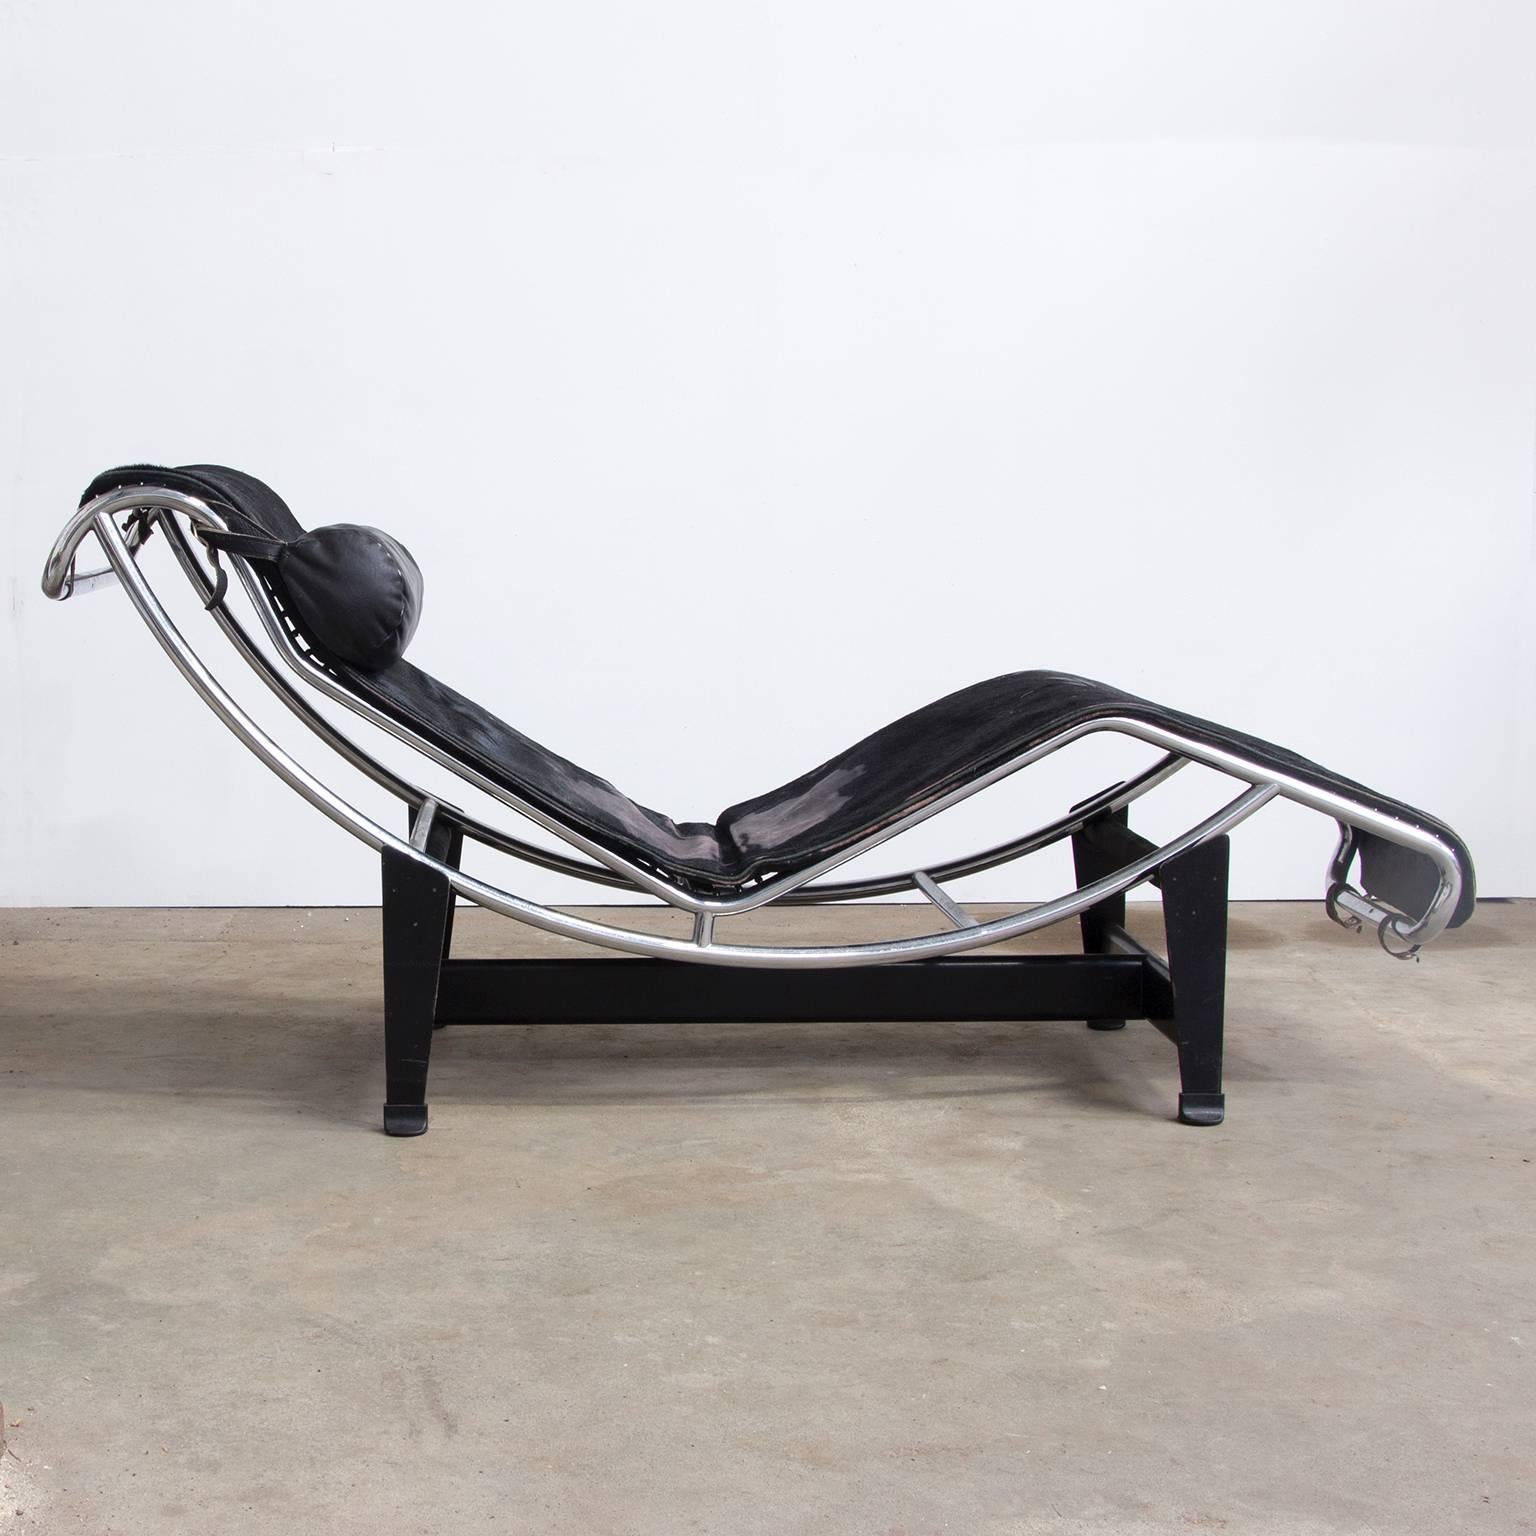 Le Corbusier LC4 chaise longue for Cassina with adjustable polished chrome-plated steel frame and innovative self-supporting mattress, covered in original and wonderful patinated black pony fur.

Some spots with loss of ponyhair. 
Frame in very good